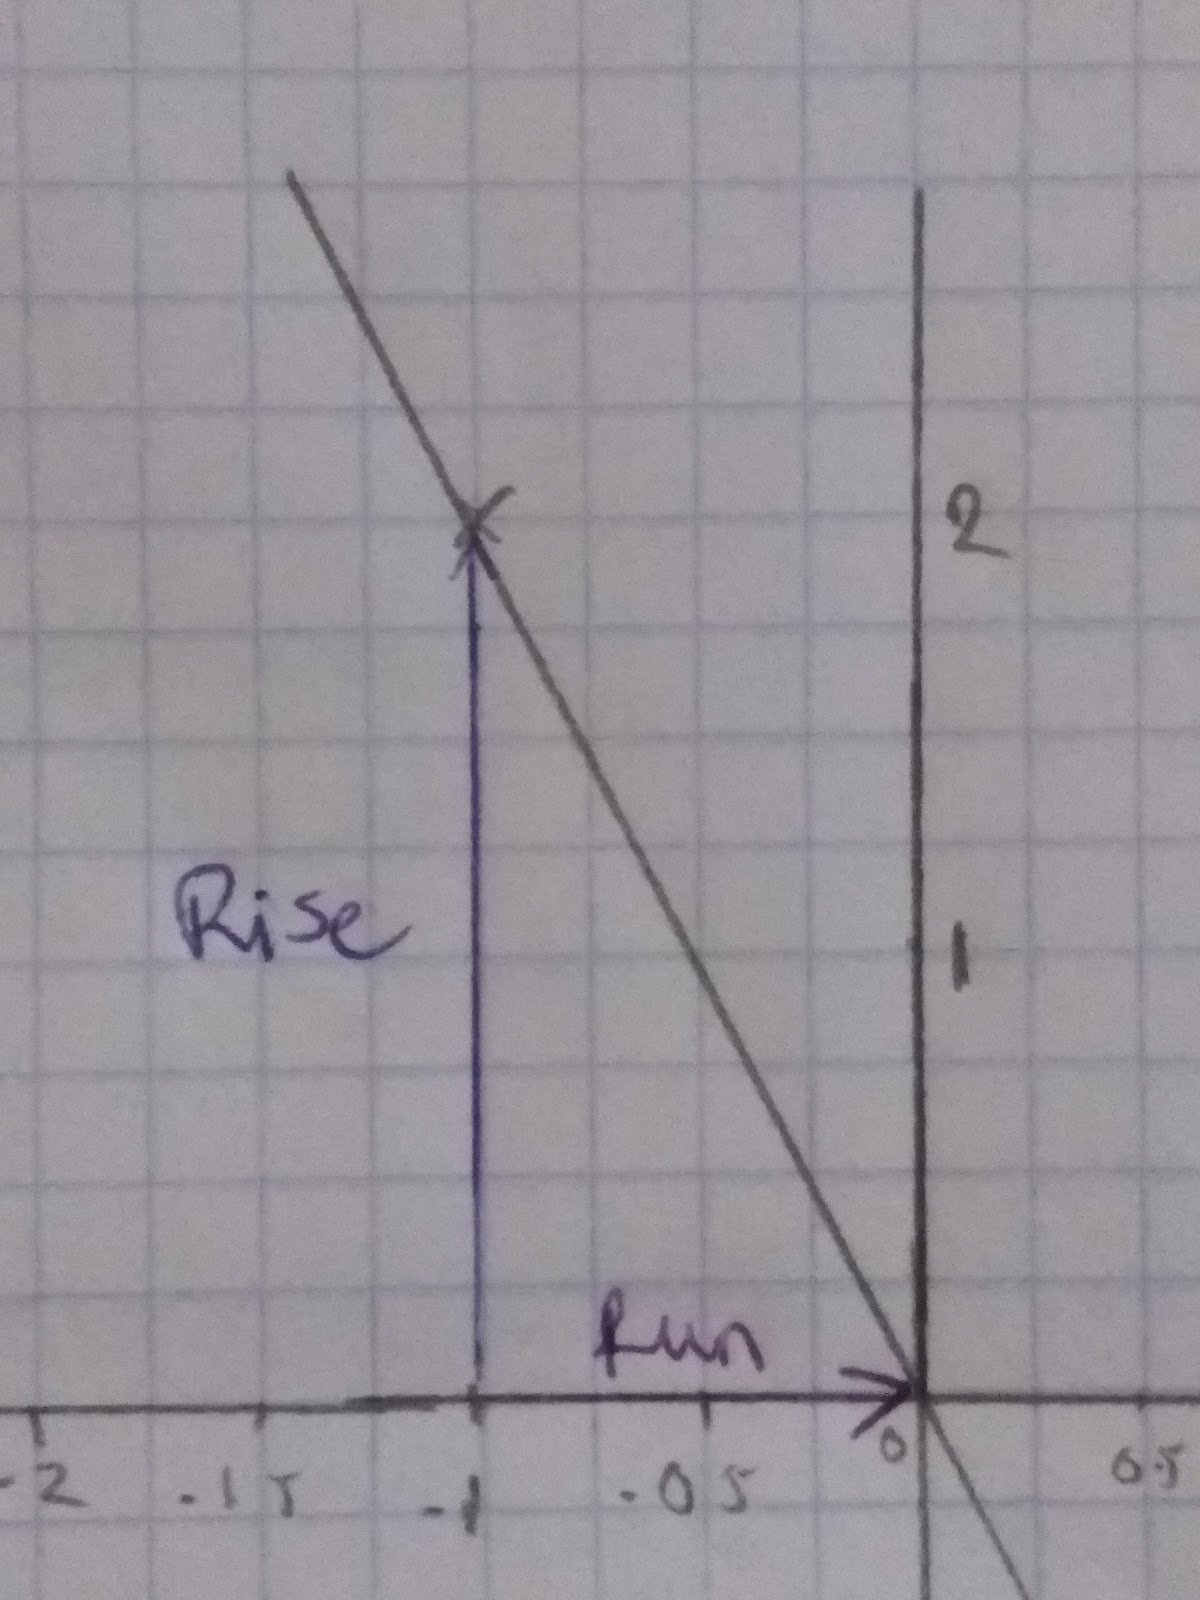 Finding the Equation of a Line, figure 2